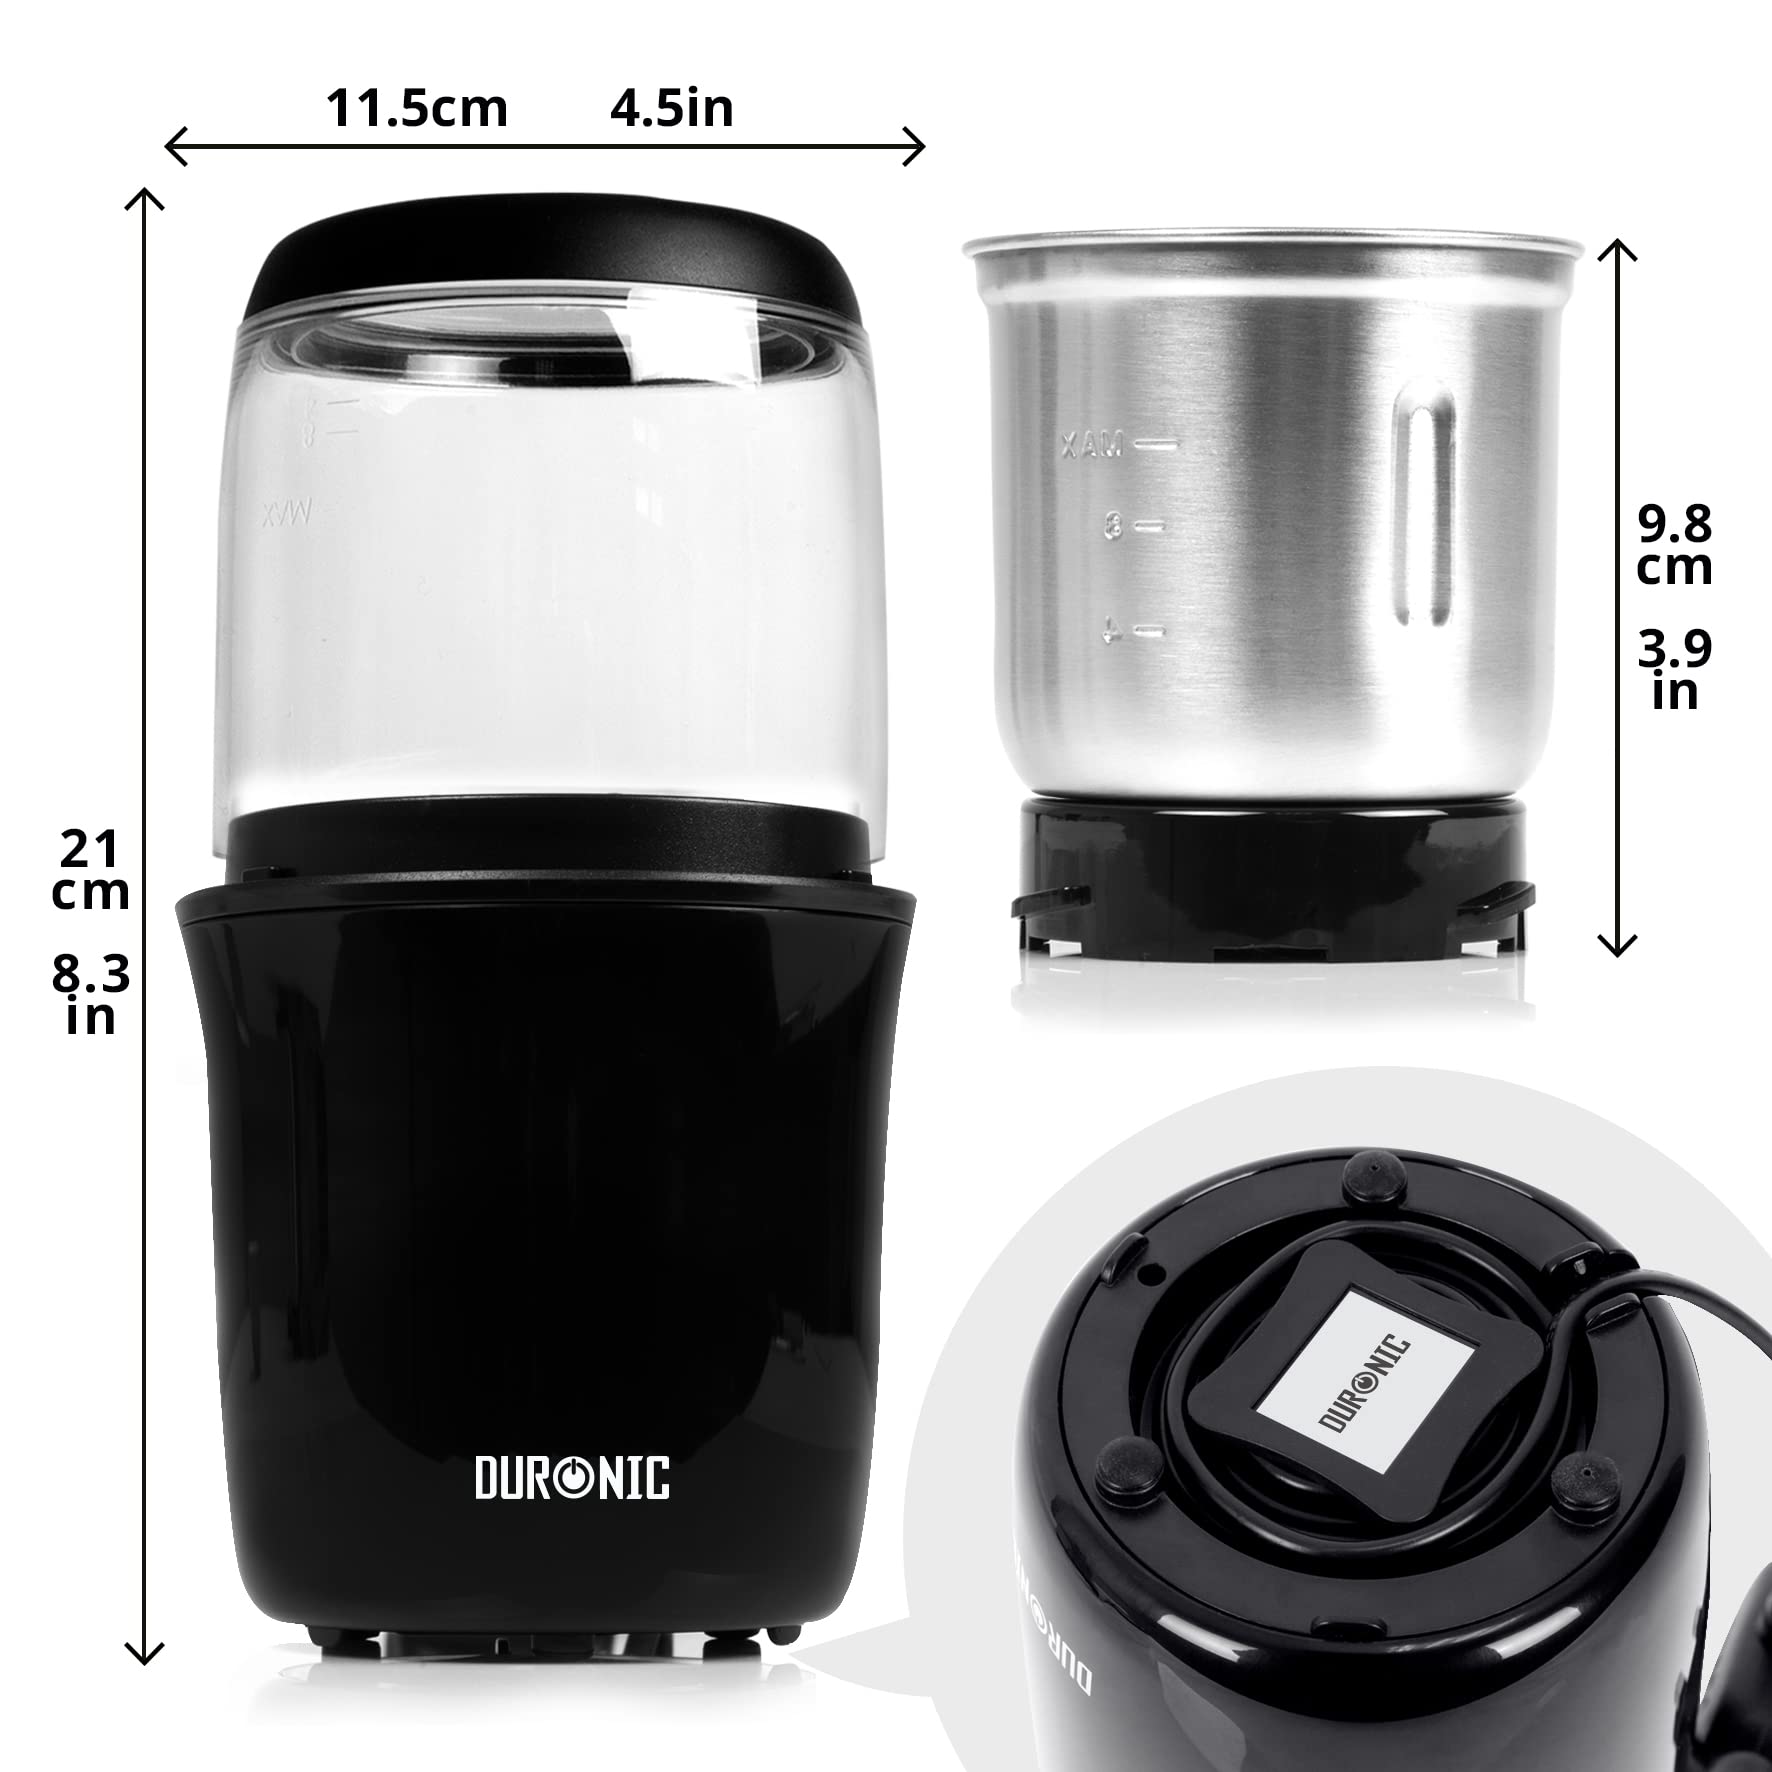 Duronic Coffee Grinder Electric Blade CG250 | Grinding Mill | Nuts Spice Herb Seed Bean Cappuccino | 75g Capacity | Stainless-Steel | 250W Motor